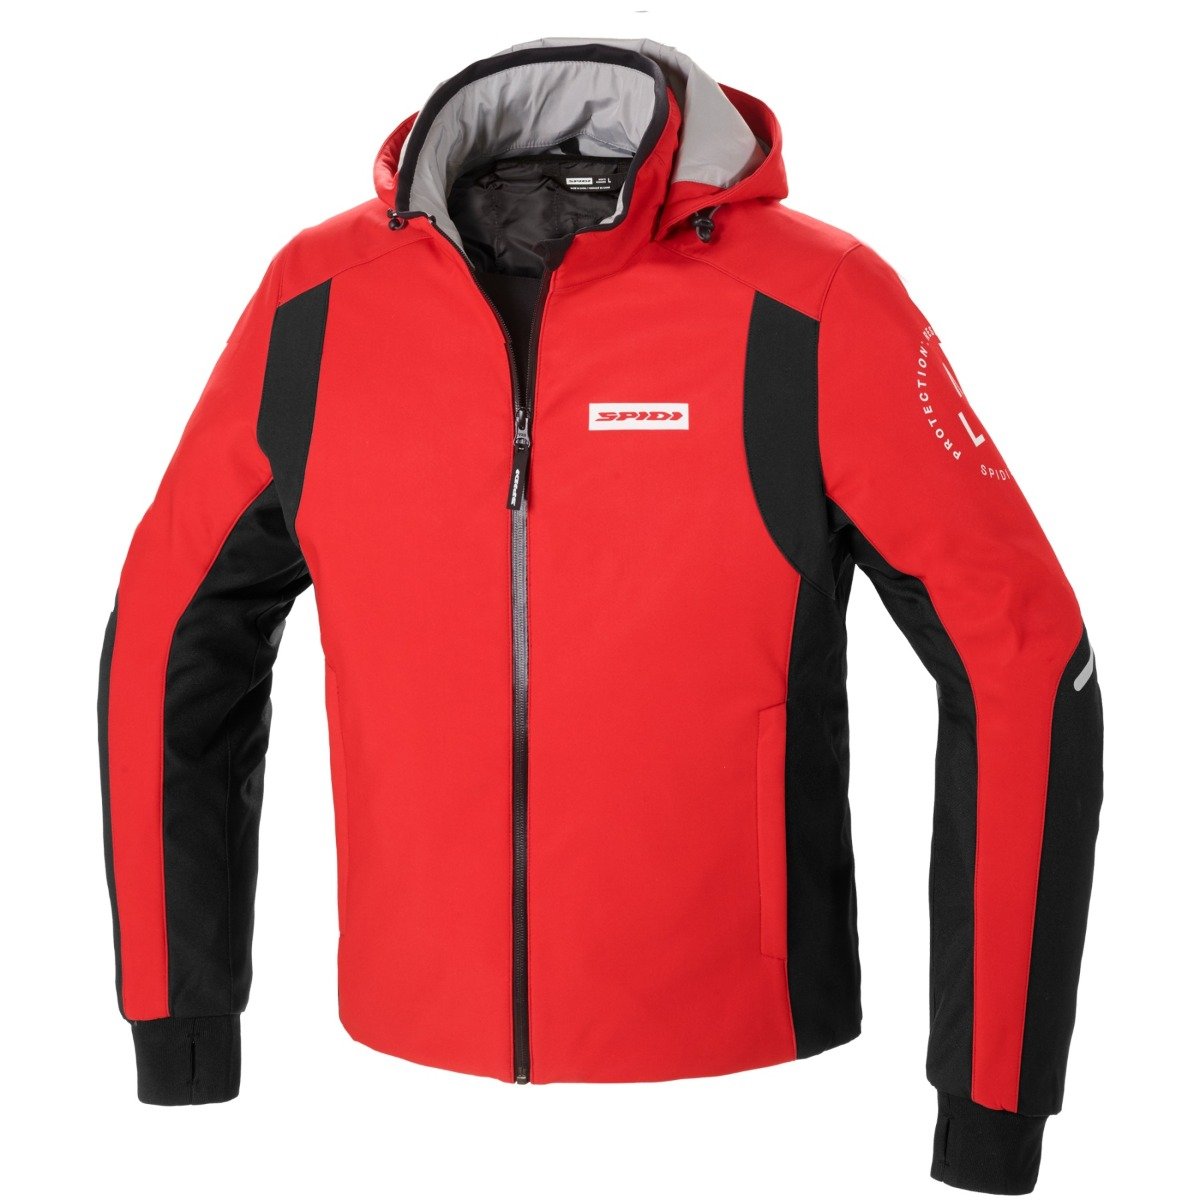 Image of Spidi Armor H2Out Jacket Red Black Size M ID 8030161442267